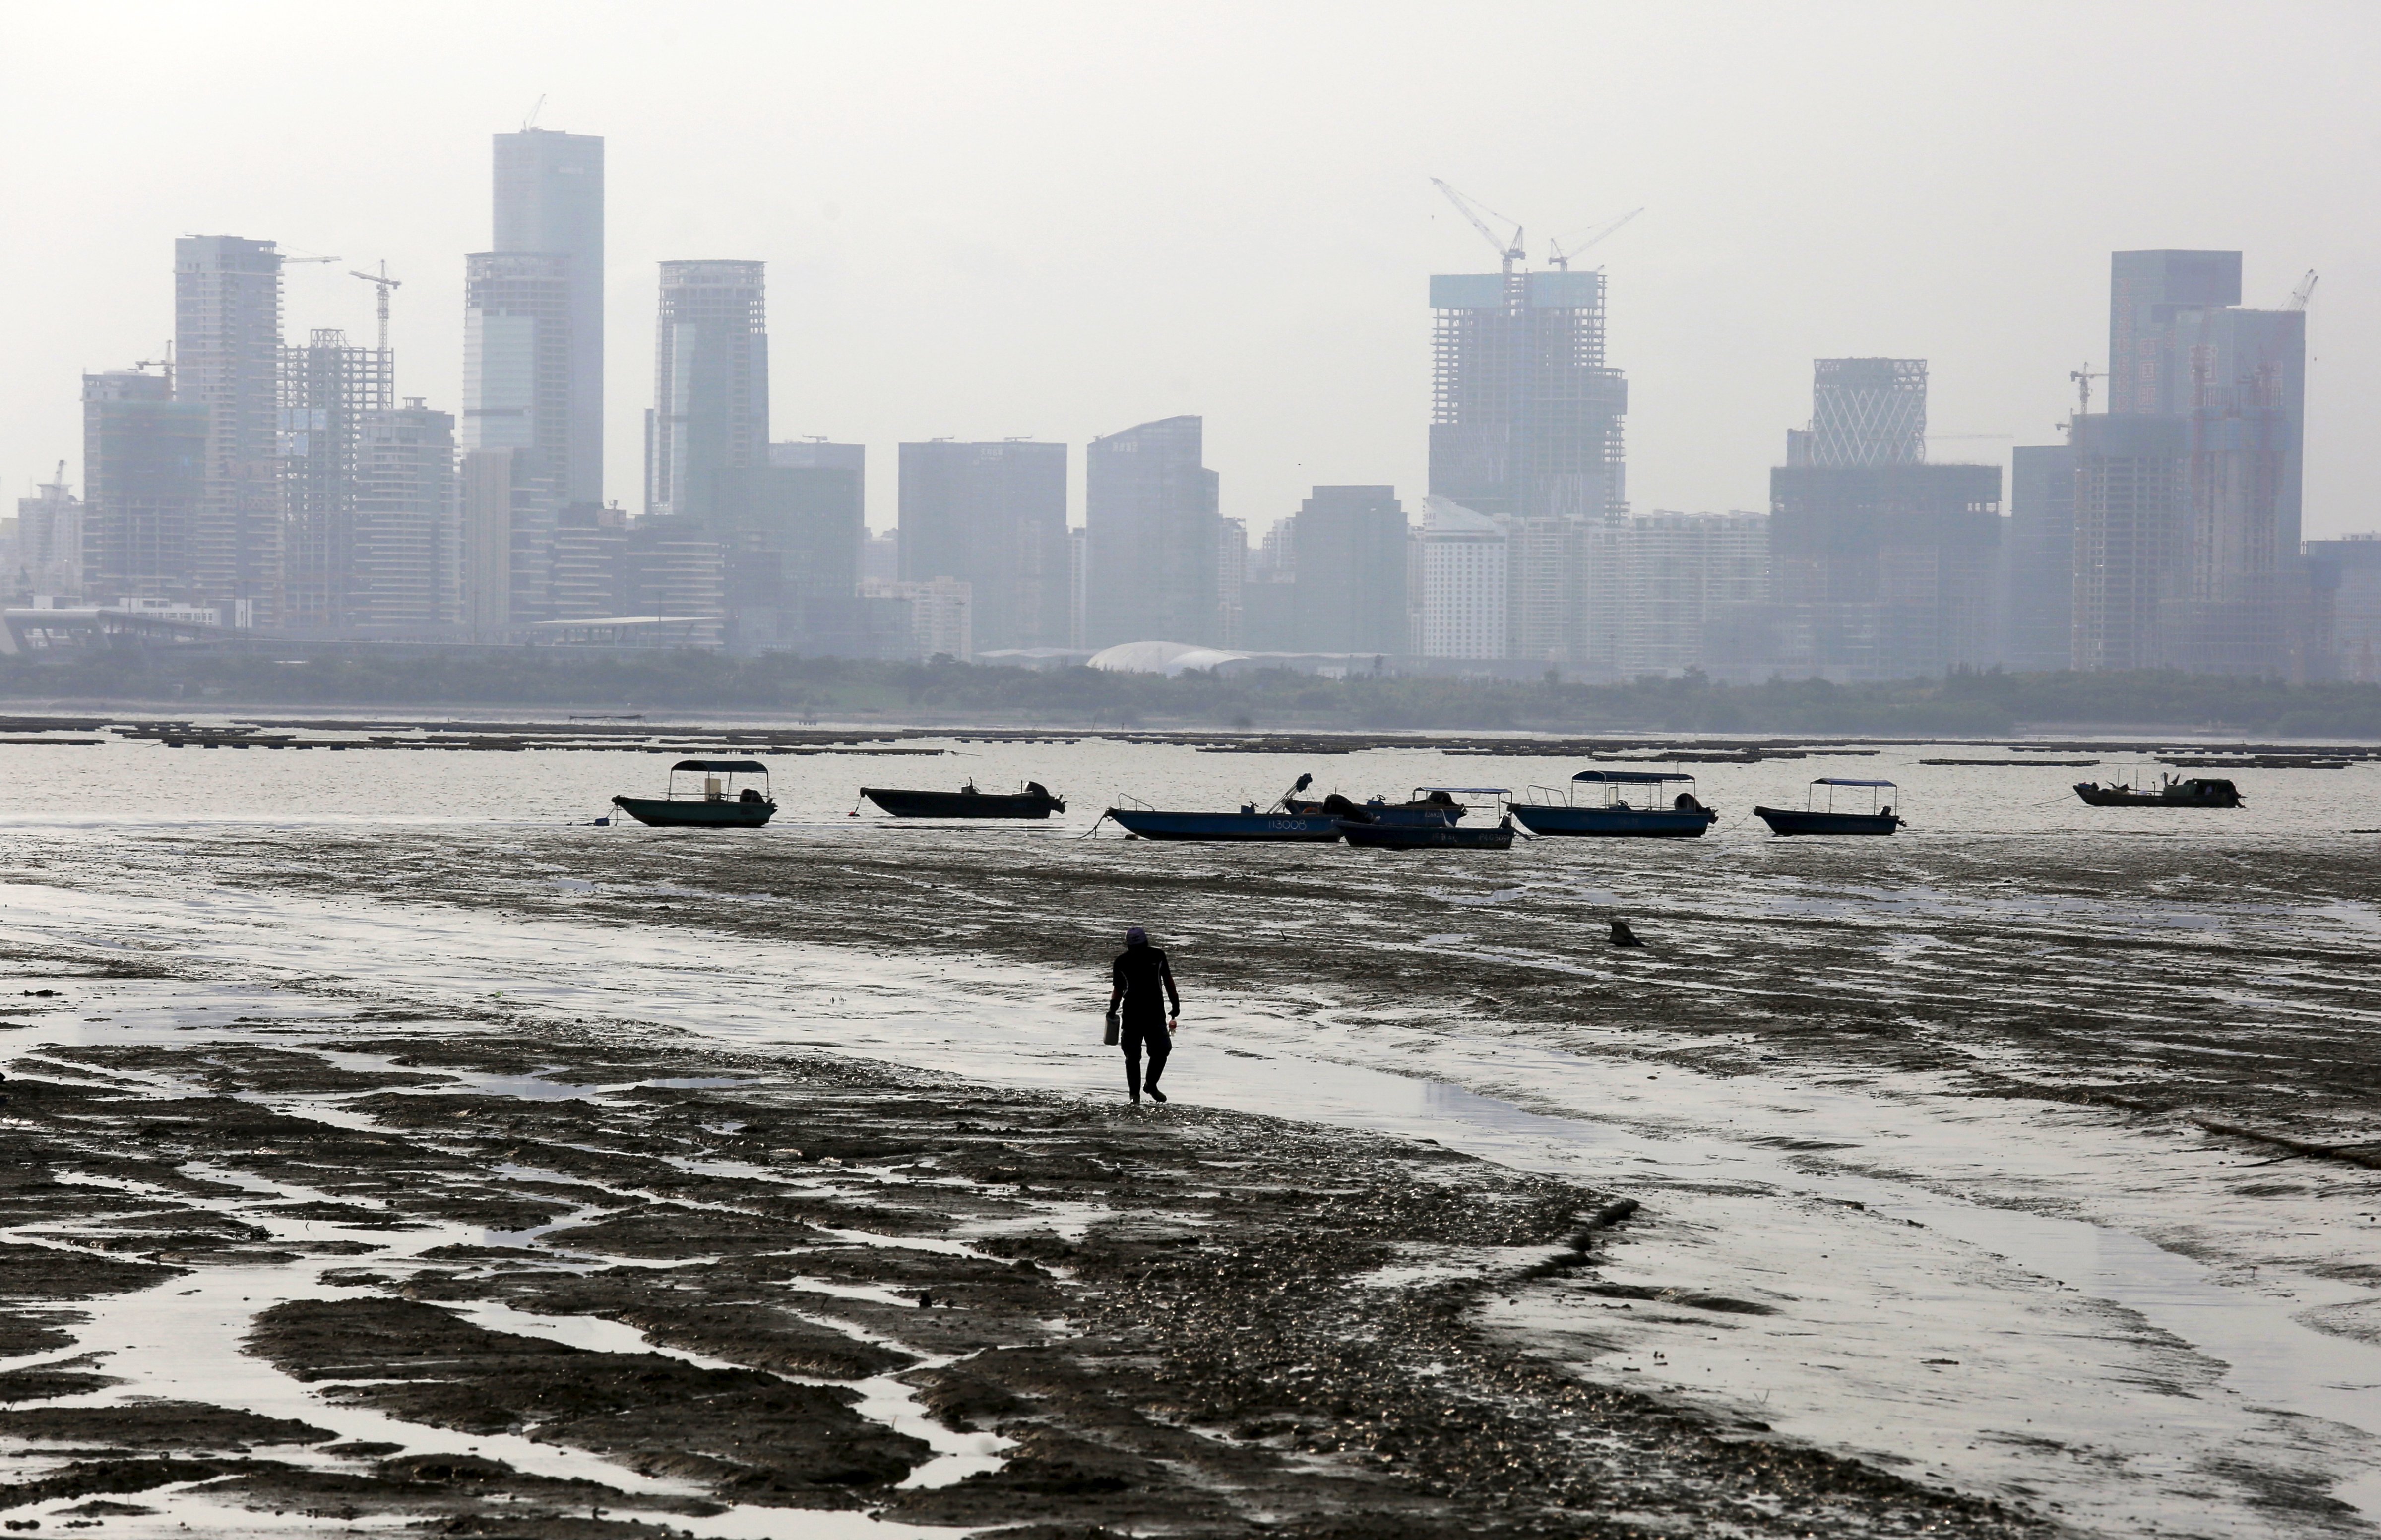 A man walks during low tide at Lau Fau Shan, famous for its oyster culture, in Hong Kong's rural New Territories on July 3, 2015. The fast developing city of Shenzhen on mainland China is seen in the background (Bobby Yip—Reuters)